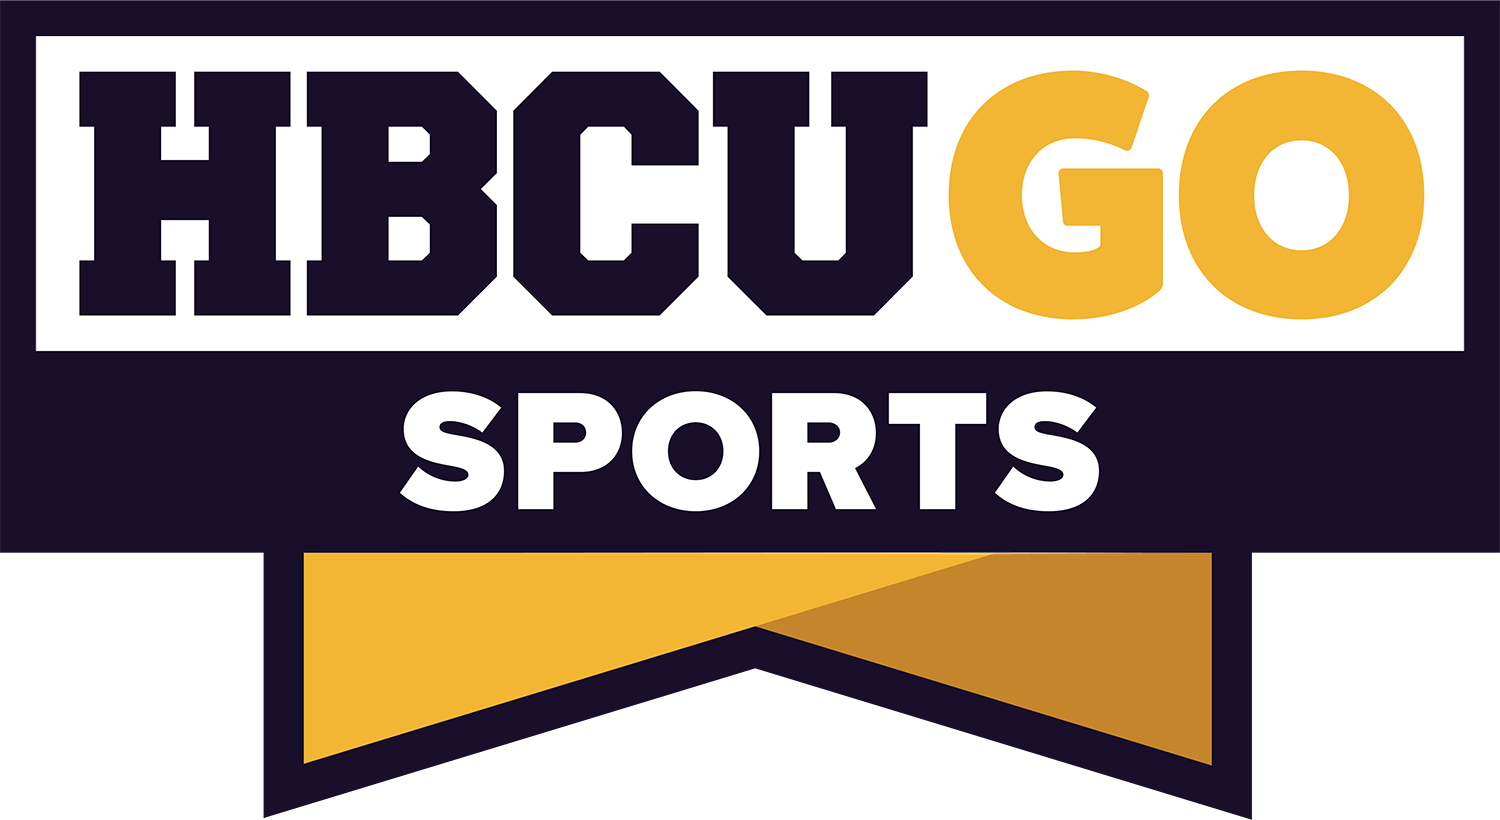 SWAC AND HBCU GO ANNOUNCE 2023 FOOTBALL SCHEDULE 24/7 Business Reporter